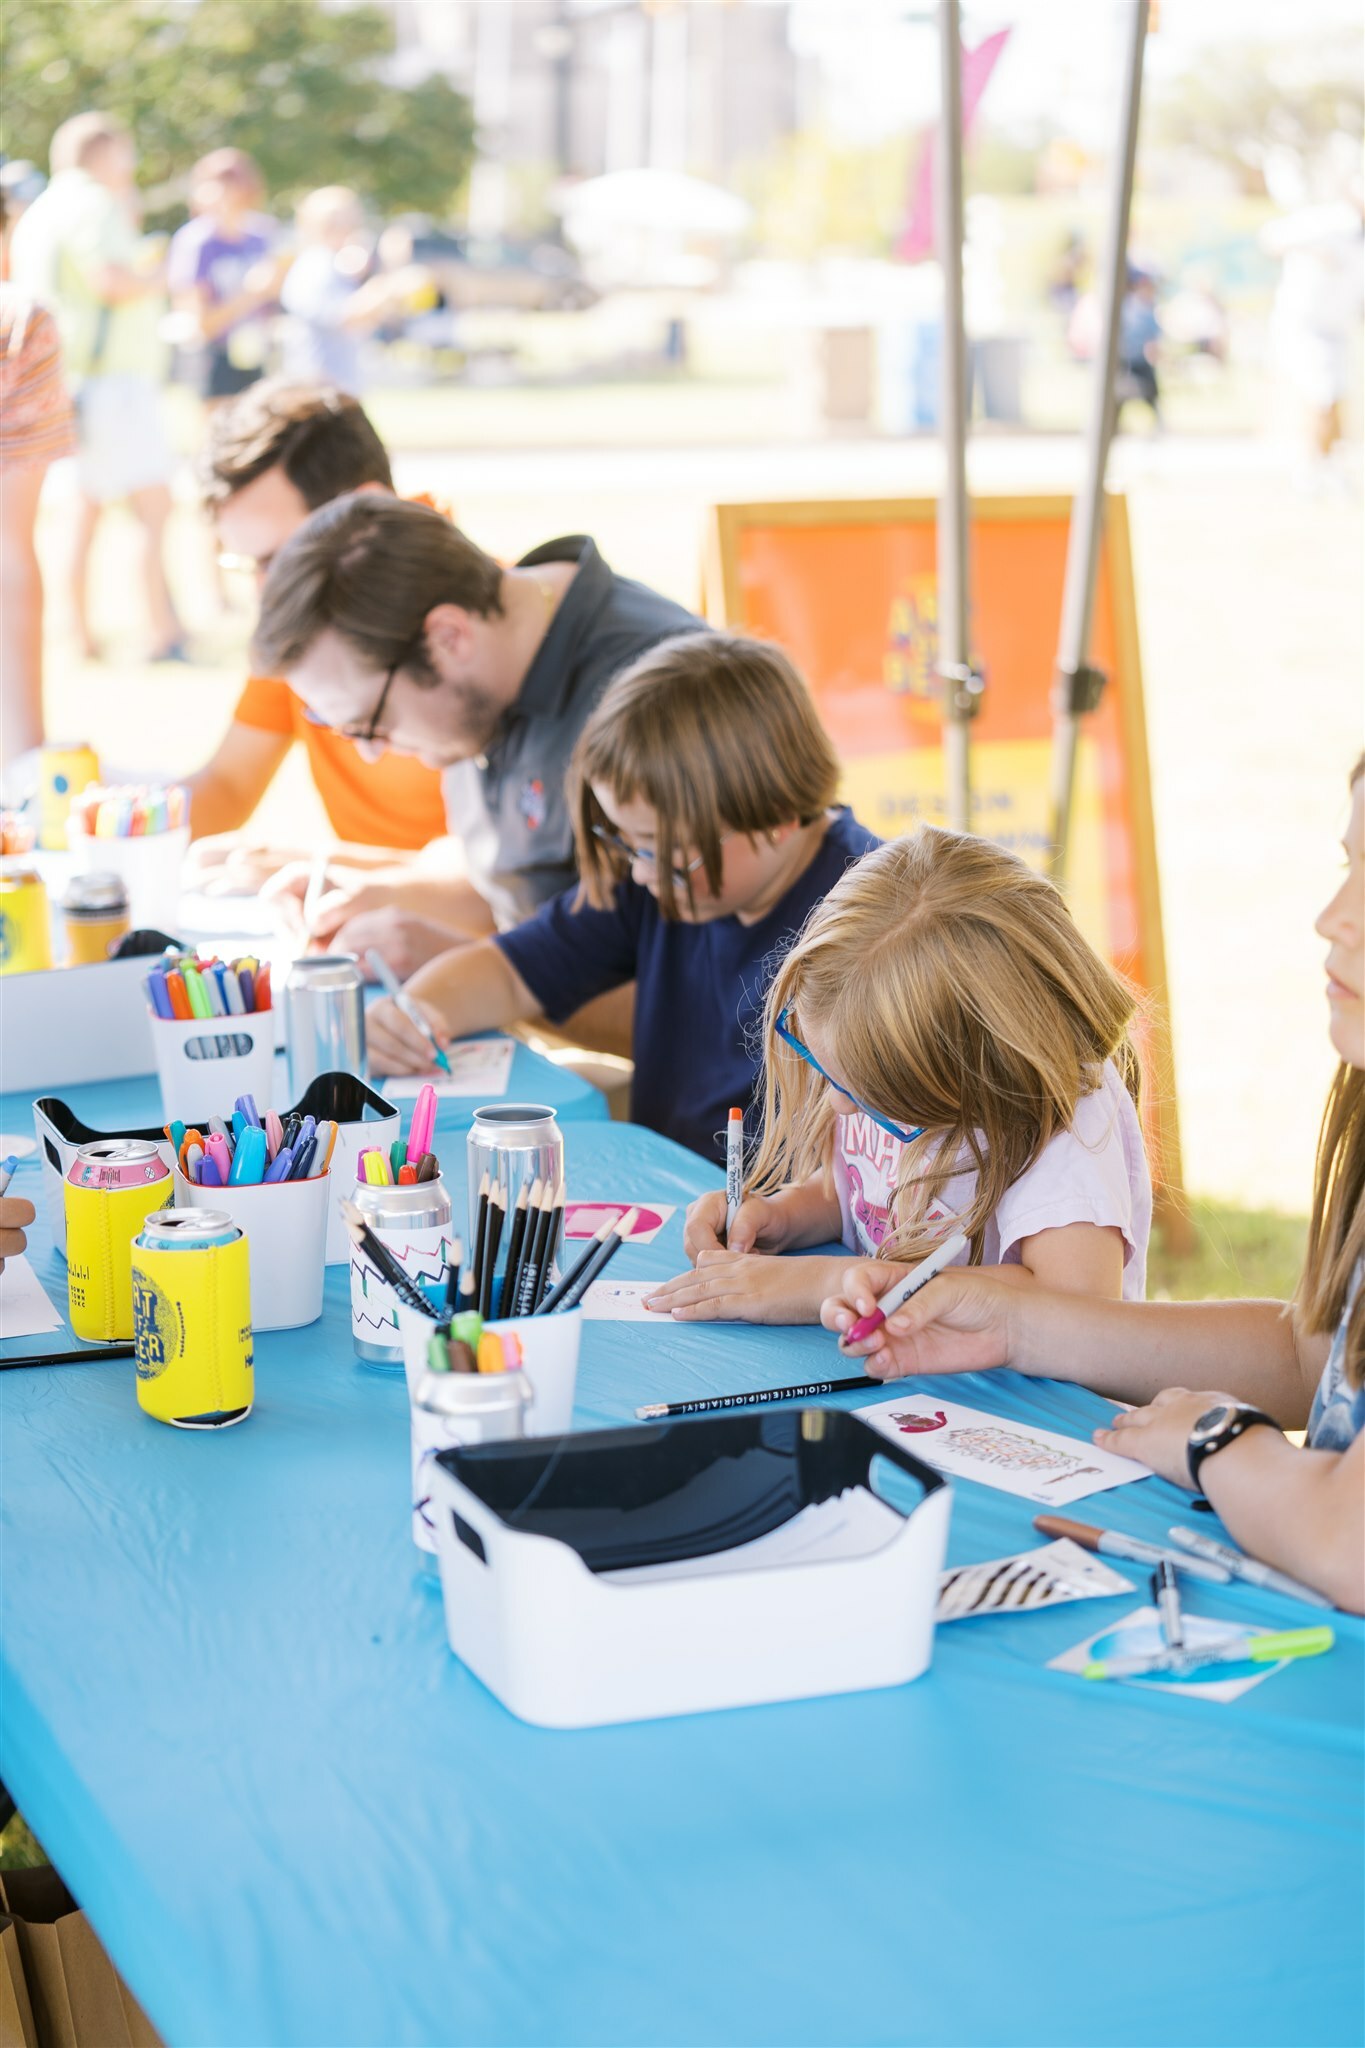 Kids and adults alike are sitting a table with a blue tablecloth. There are boxes and cups of markers and pencils on the table. Everyone is art-making.